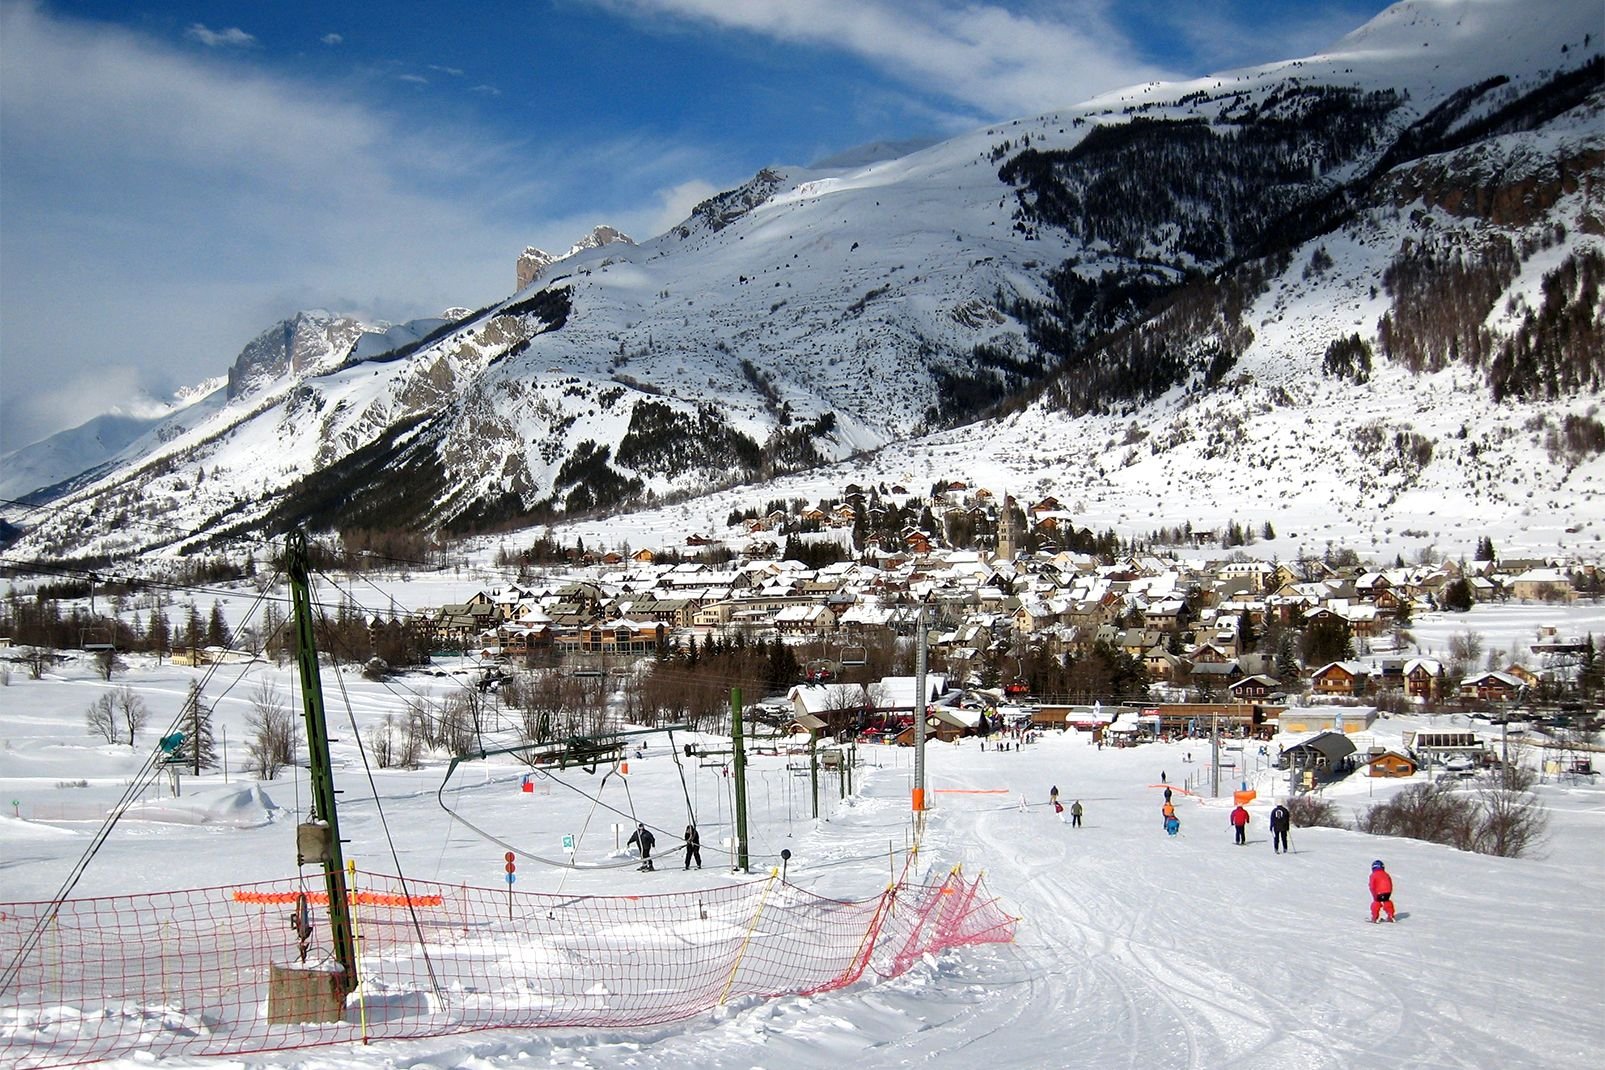 Known as 'Serre Che', this posh resort in the Southern Alps is actually a valley that stretches out for nearly 8 miles from Lautaret pass to Briançon. A rather atypical place, the Serre Chevalier Valley is home to 3 villages (Le Monêtier les Bains, La Salle les Alpes/Villeneuve, Saint-Chaffrey/Chantemerle), 13 hamlets and a UNESCO-listed World Heritage City: Briançon. 
Serre Chevalier is not just a ...